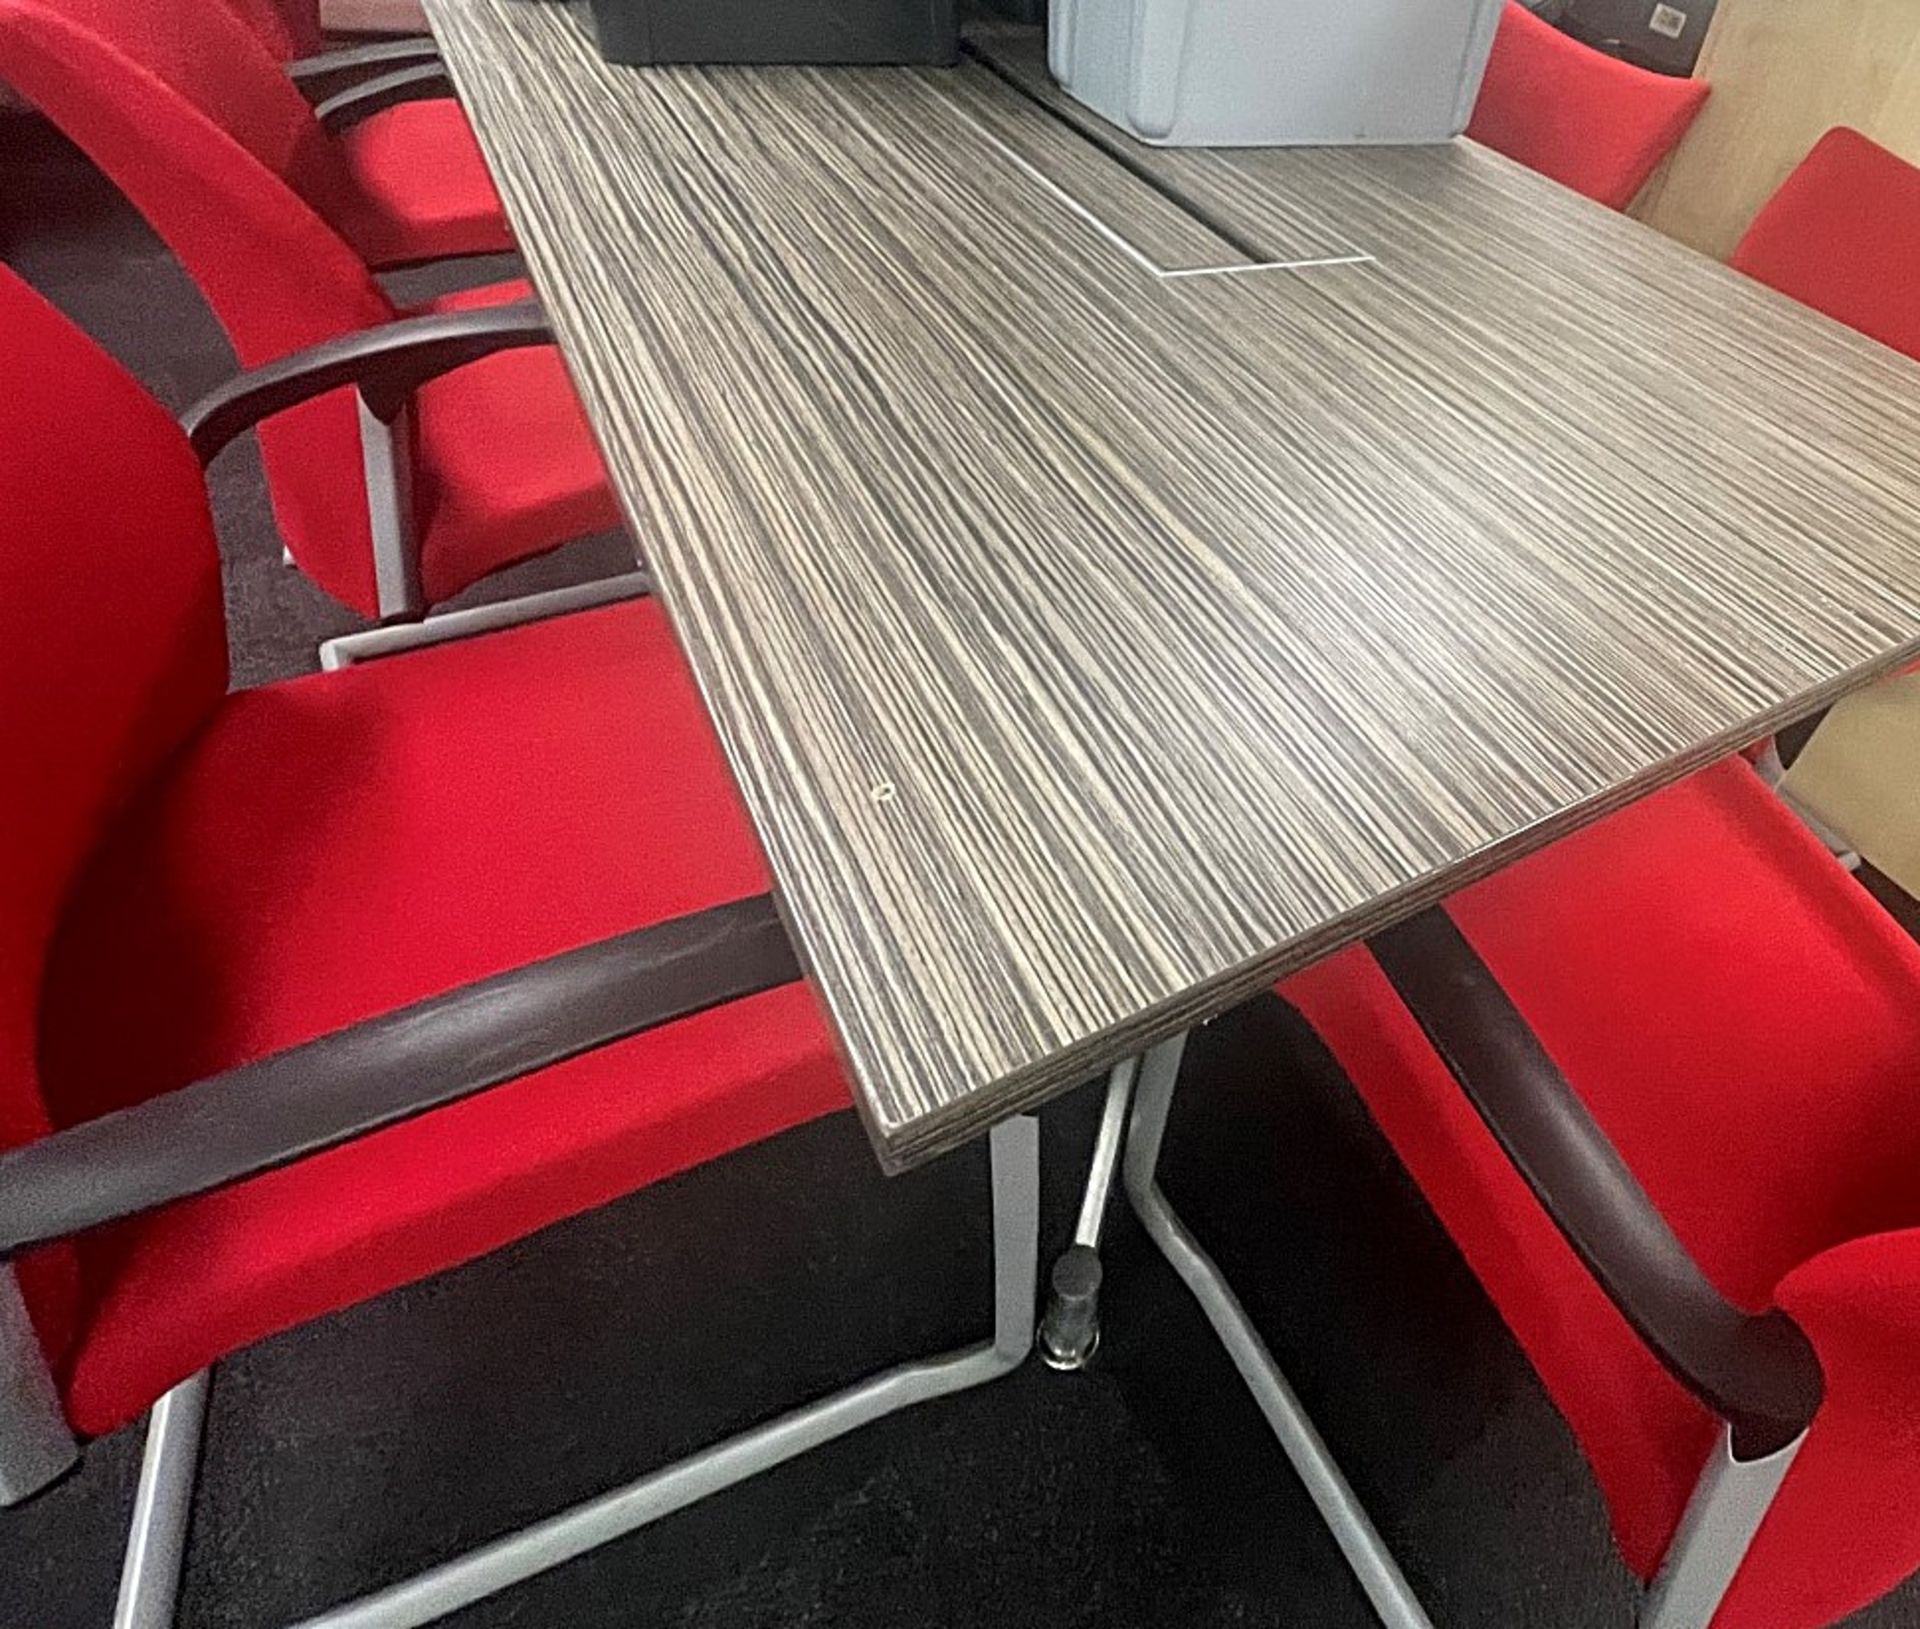 1 x 2-Metre Long Boardroom Table With 8 x Red Senator Chairs - To Be Removed From An Executive - Image 13 of 18